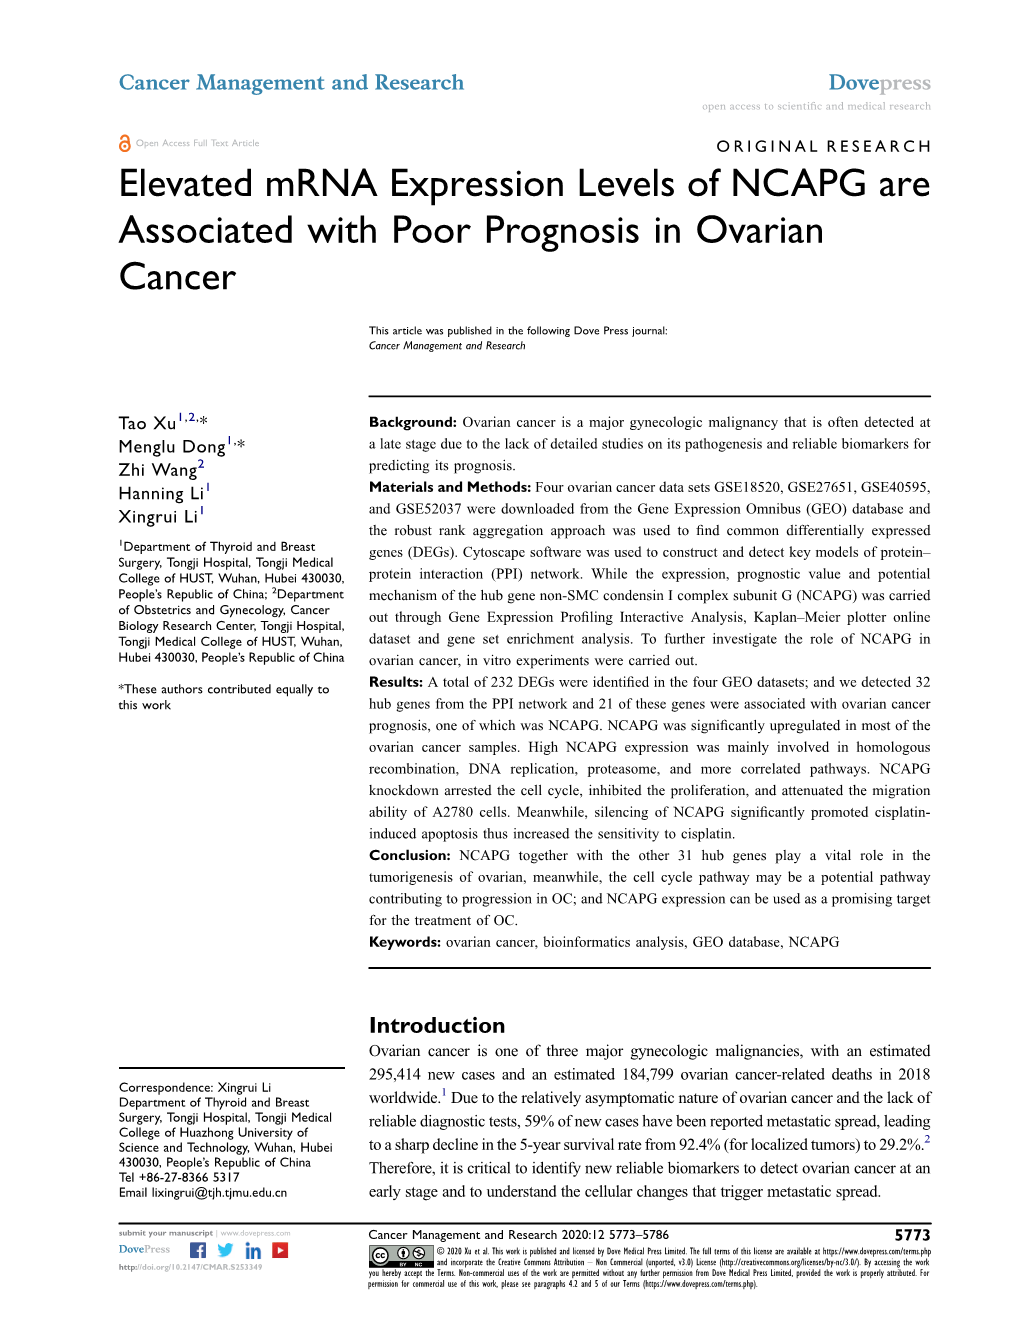 Elevated Mrna Expression Levels of NCAPG Are Associated with Poor Prognosis in Ovarian Cancer